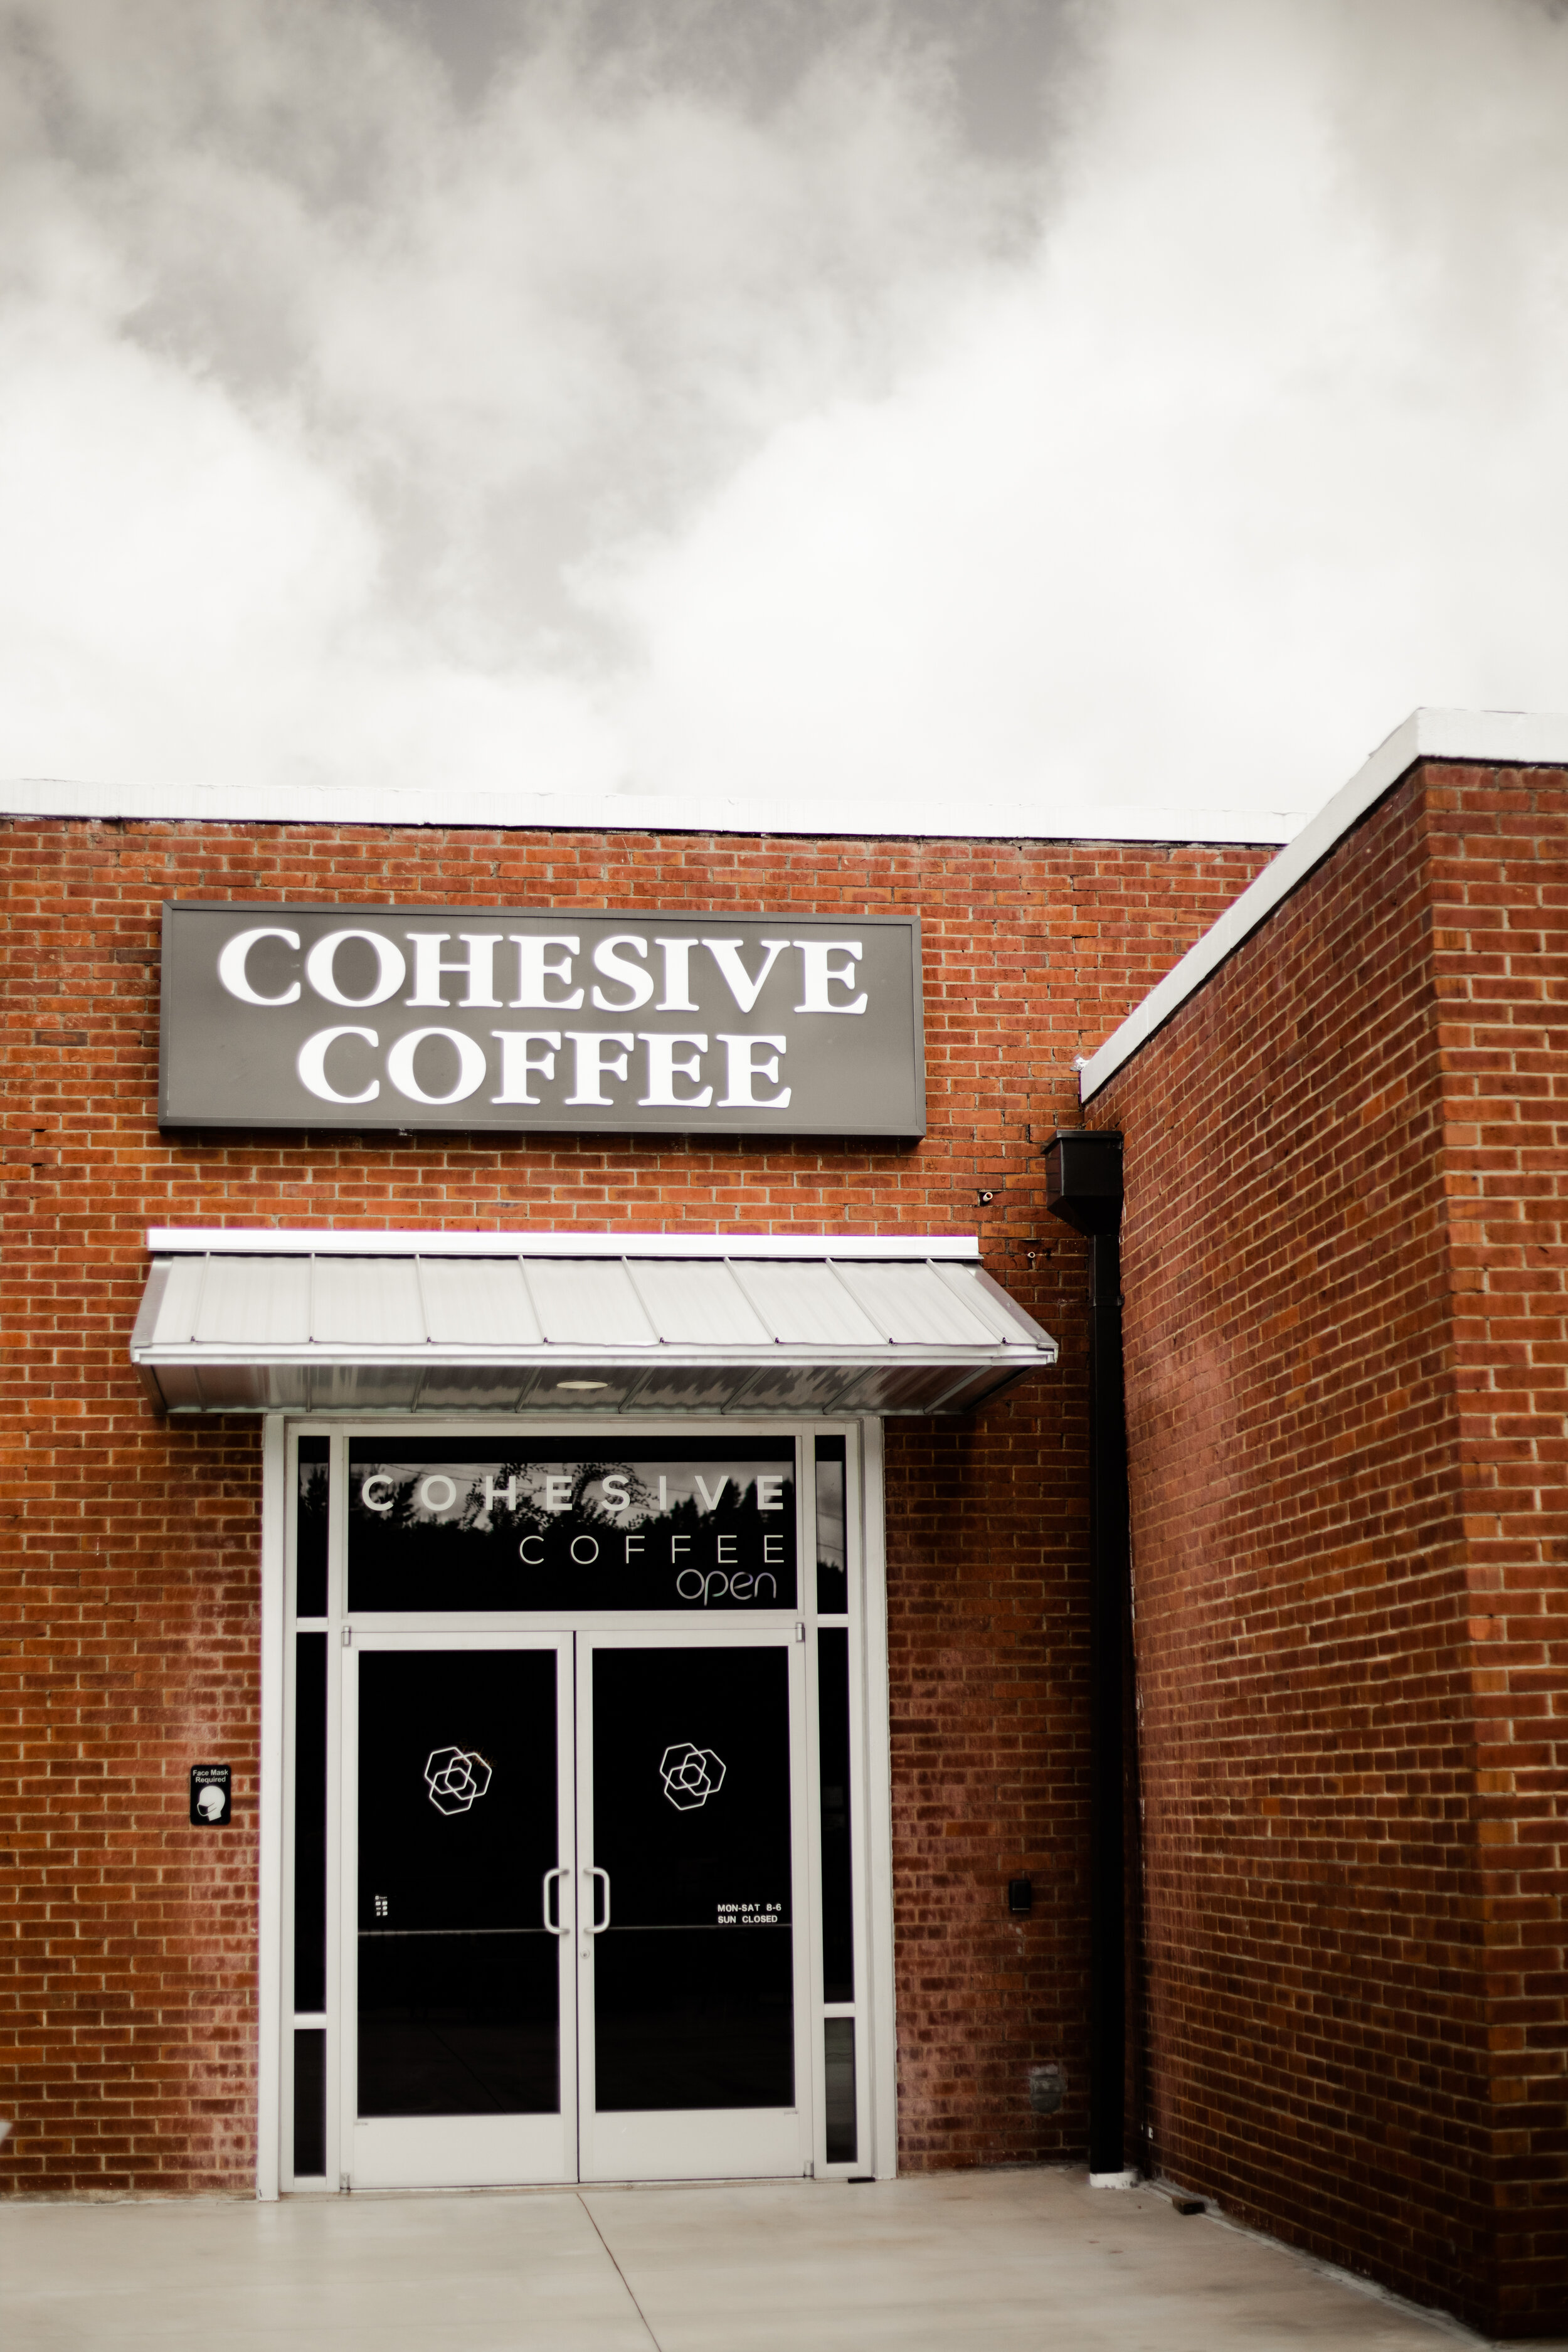 Although Cohesive Coffee is a fairly new shop on the block, it is already a popular spot for NGU students to study and socialize.